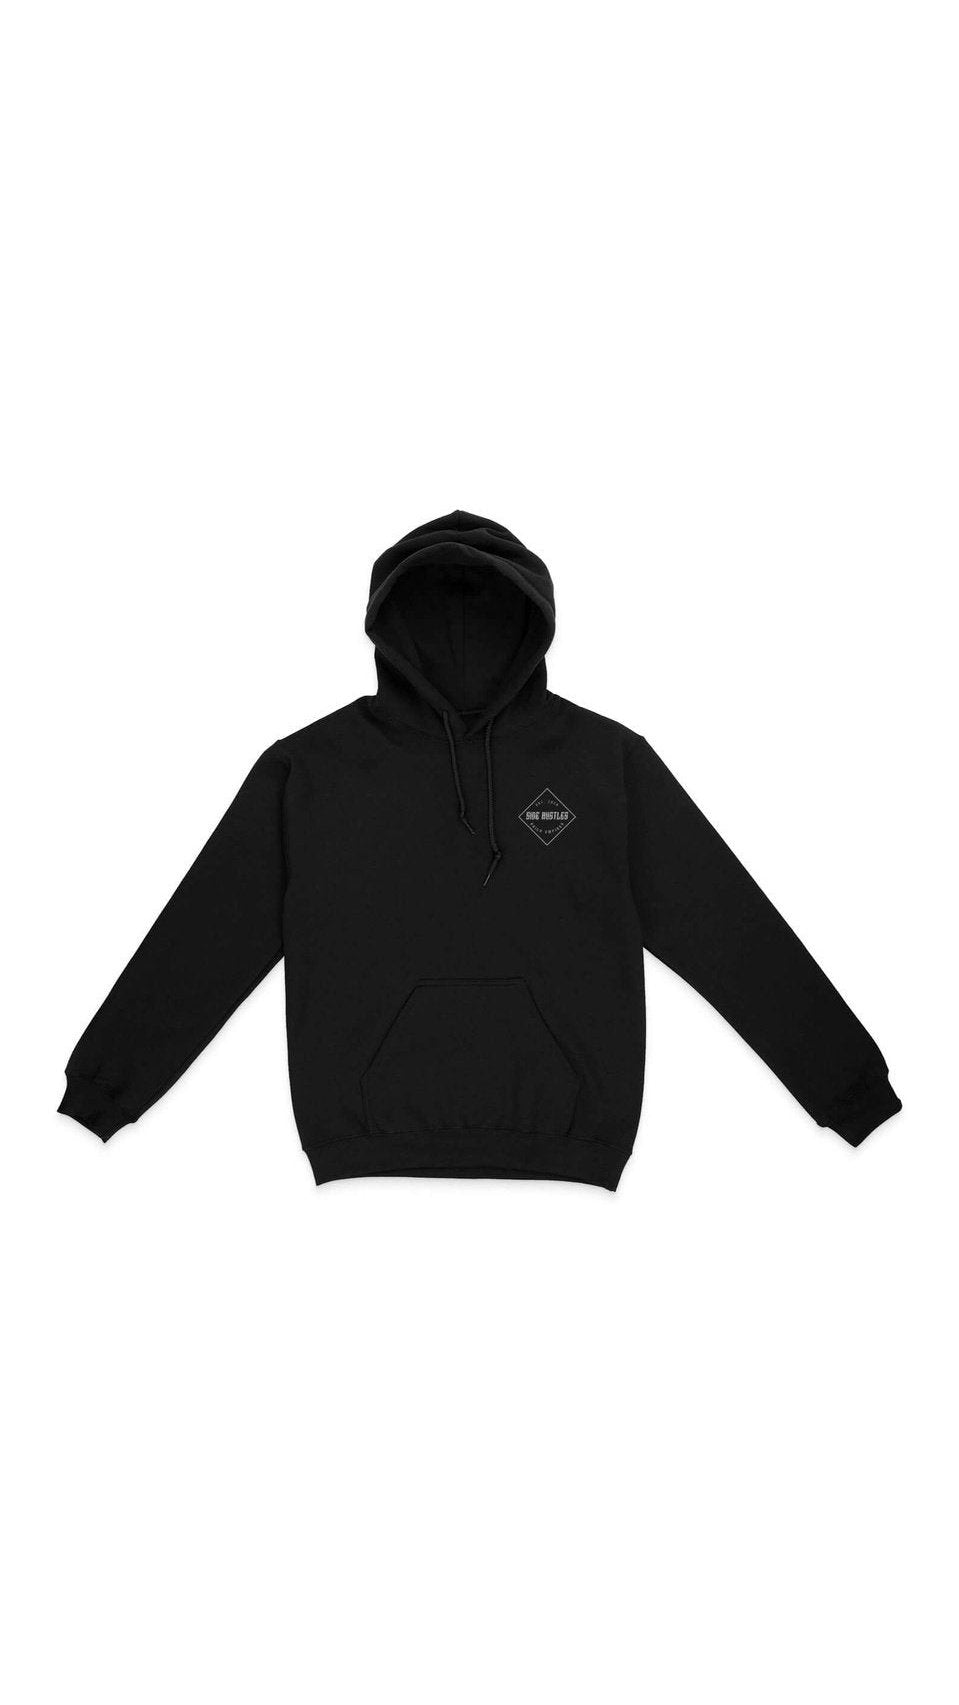 softest hoodie ever black loose fit with side hustle white screen print